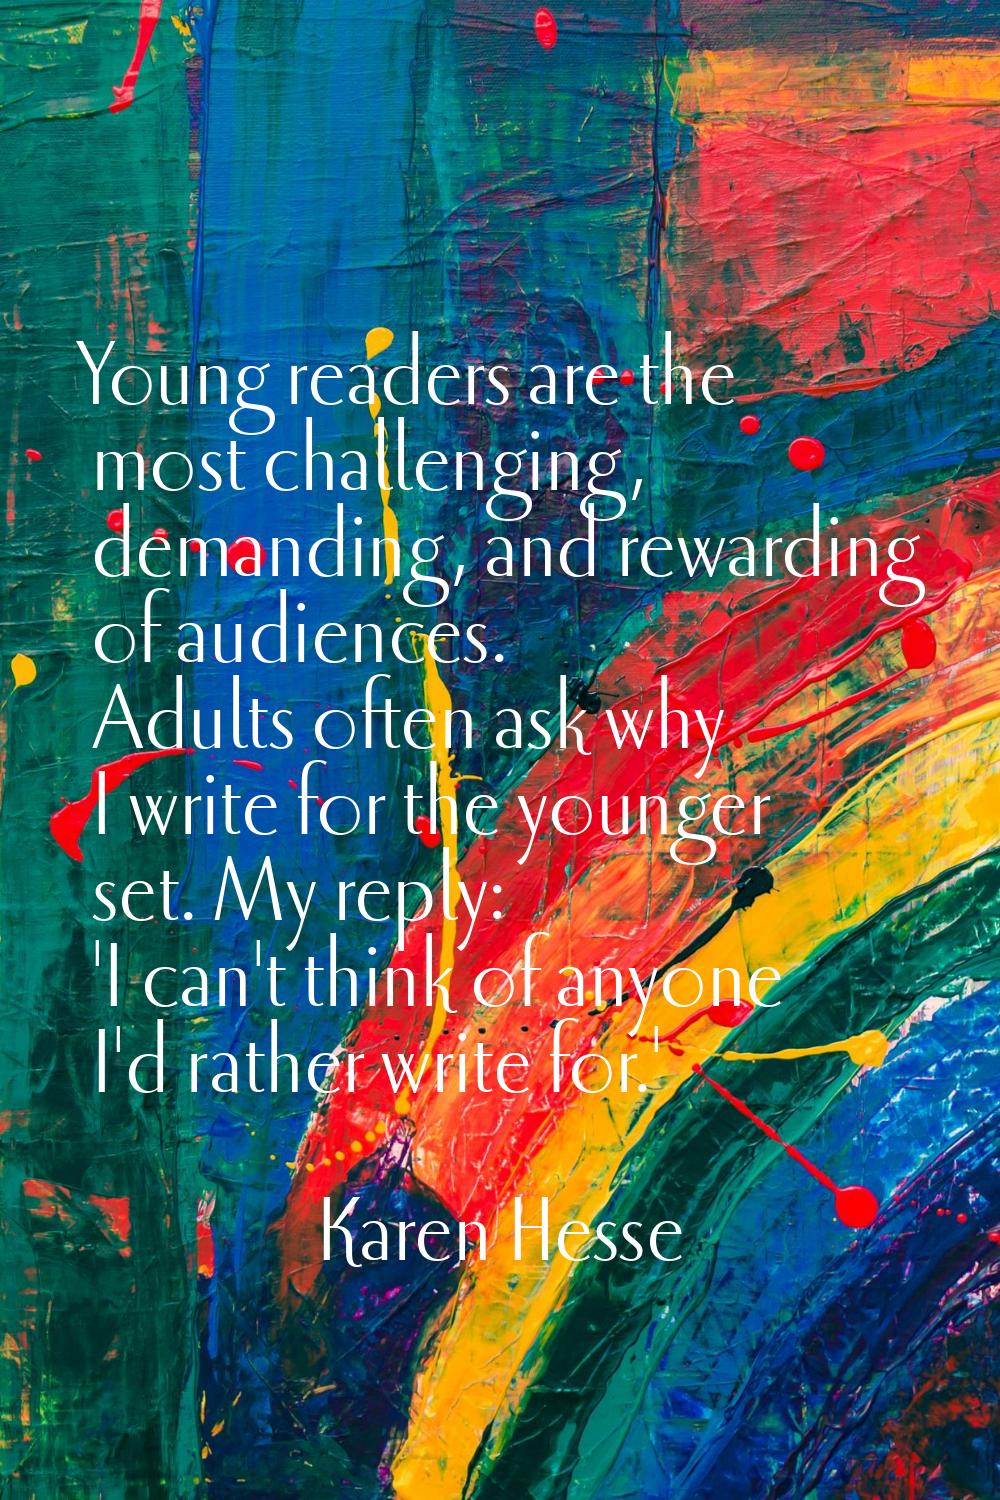 Young readers are the most challenging, demanding, and rewarding of audiences. Adults often ask why